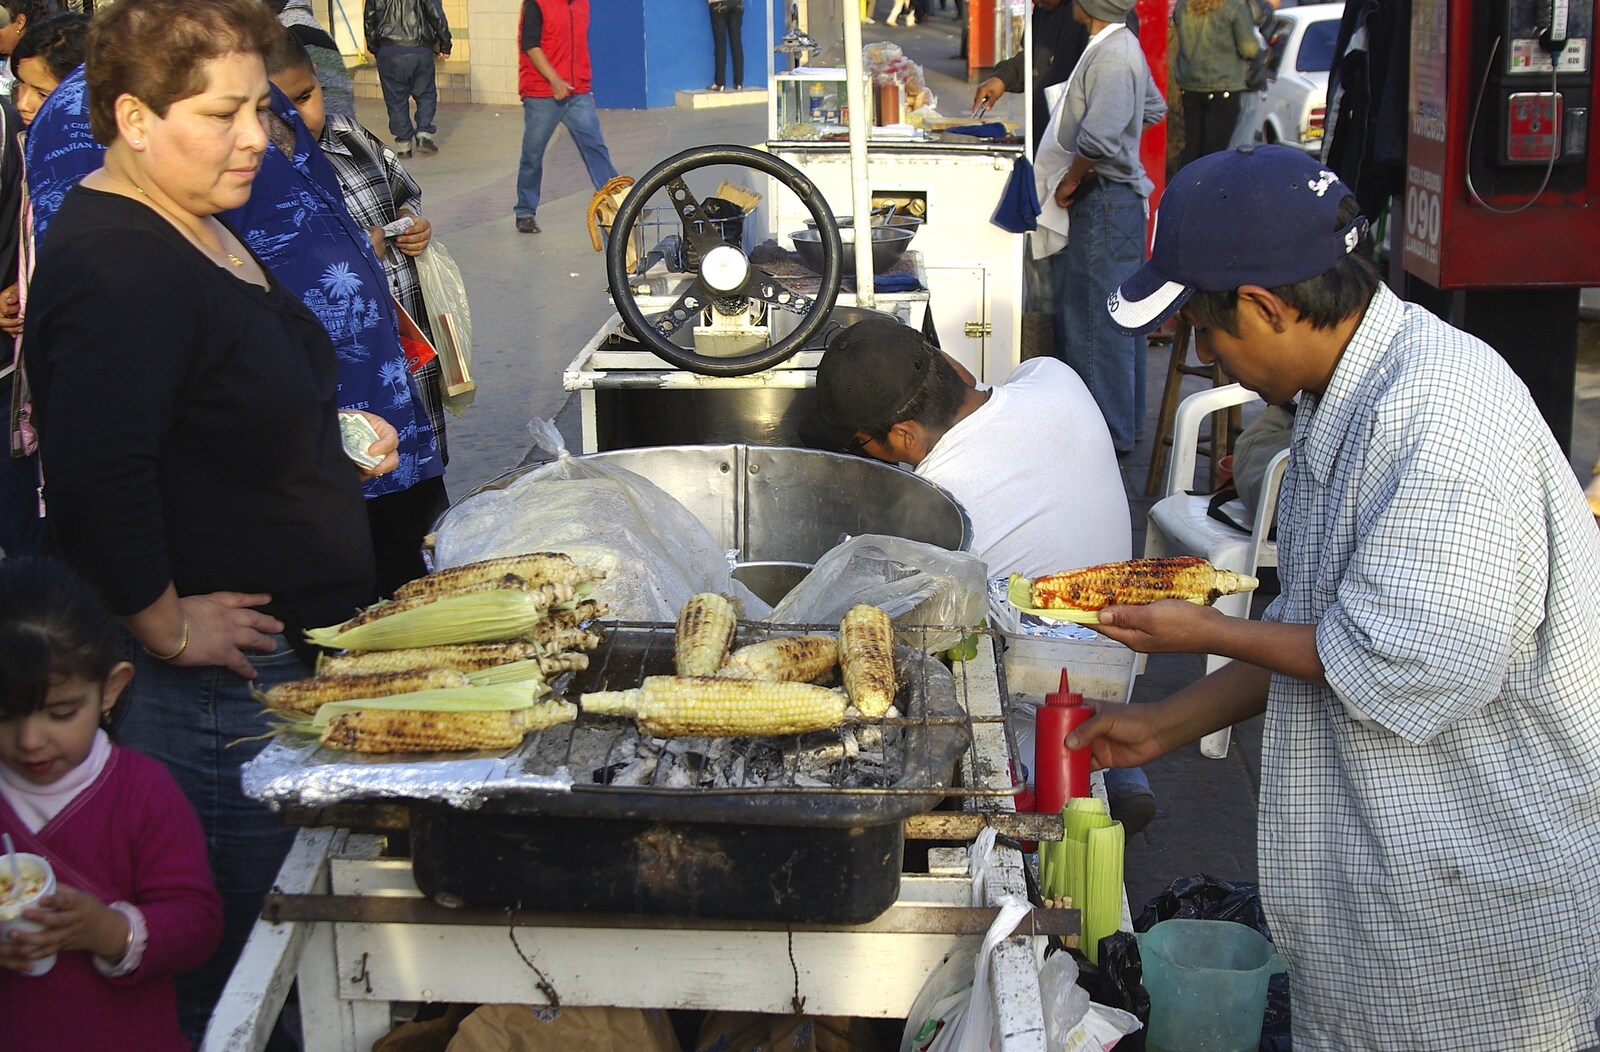 Rosarito and Tijuana, Baja California, Mexico - 2nd March 2008: Grilled corn-on-the-cob from a street vendor